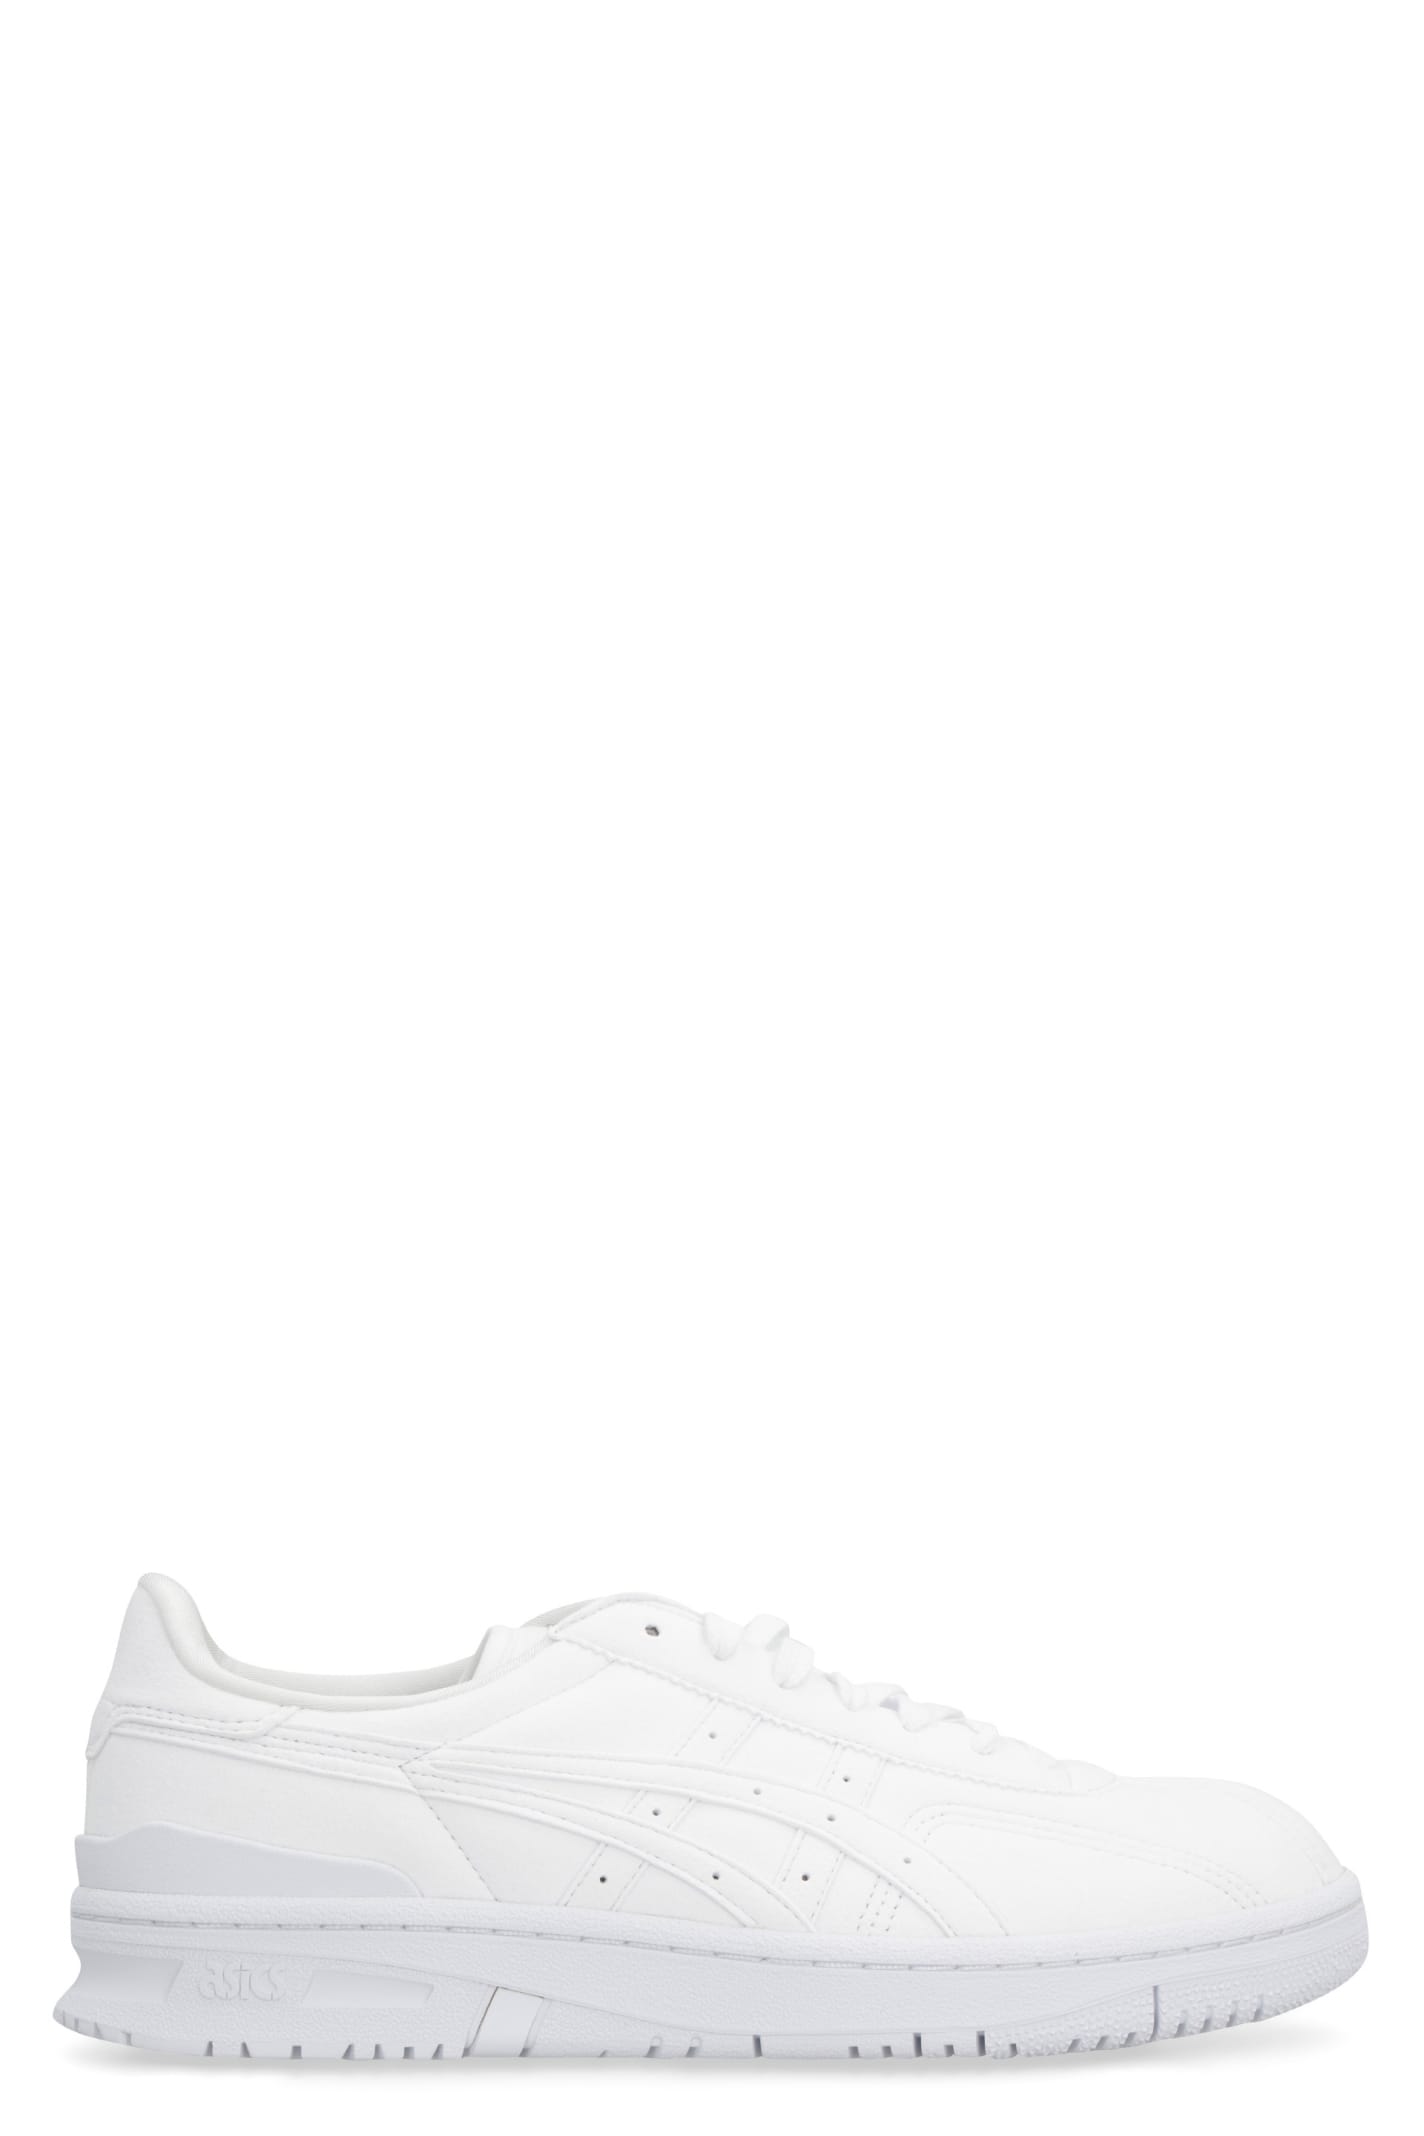 Comme Des Garçons Shirt Leather Low-top Trainers In White